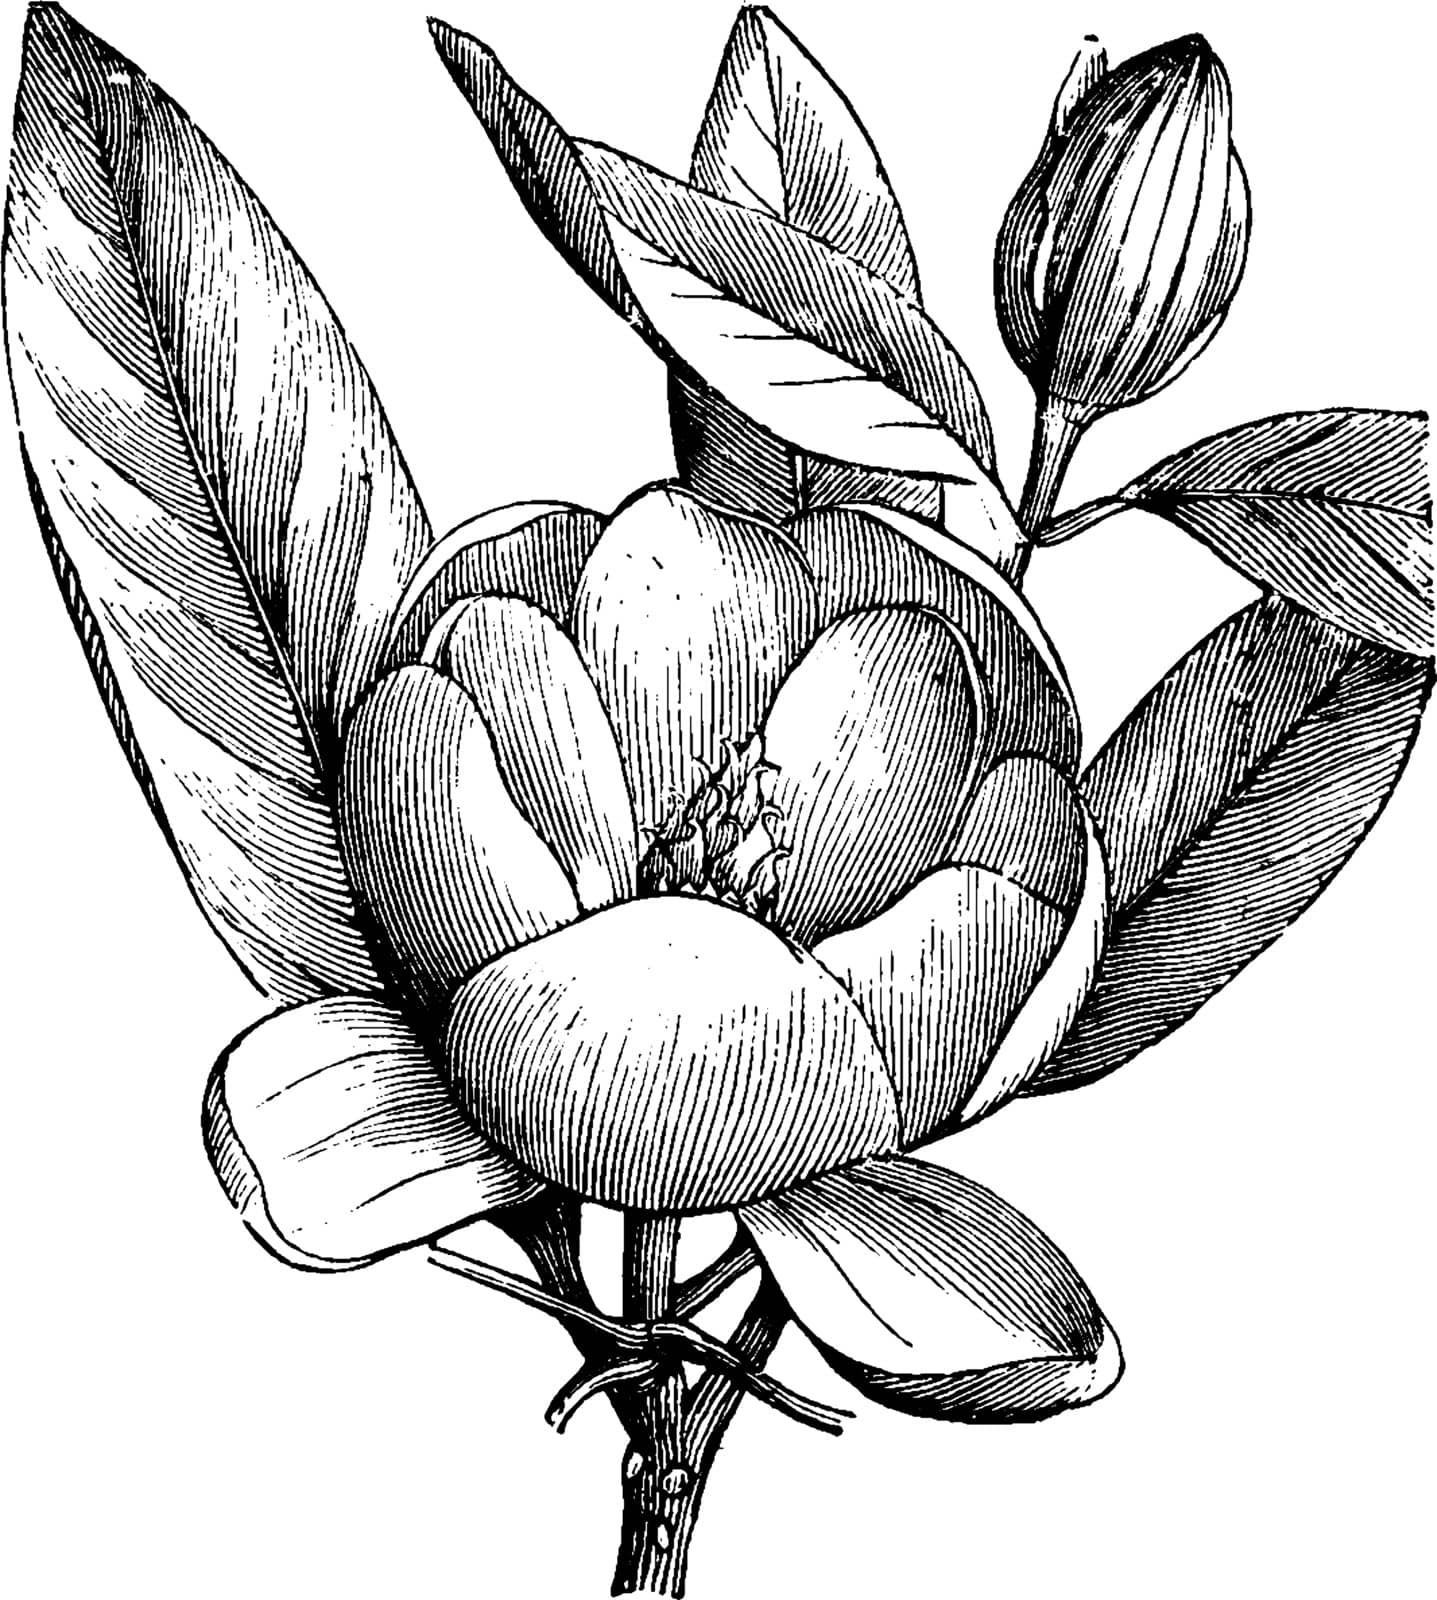 Magnolia Glauca has very aromatic white flowers. There are nine to twelve leaves per flower and there are large leaves around it, vintage line drawing or engraving illustration.